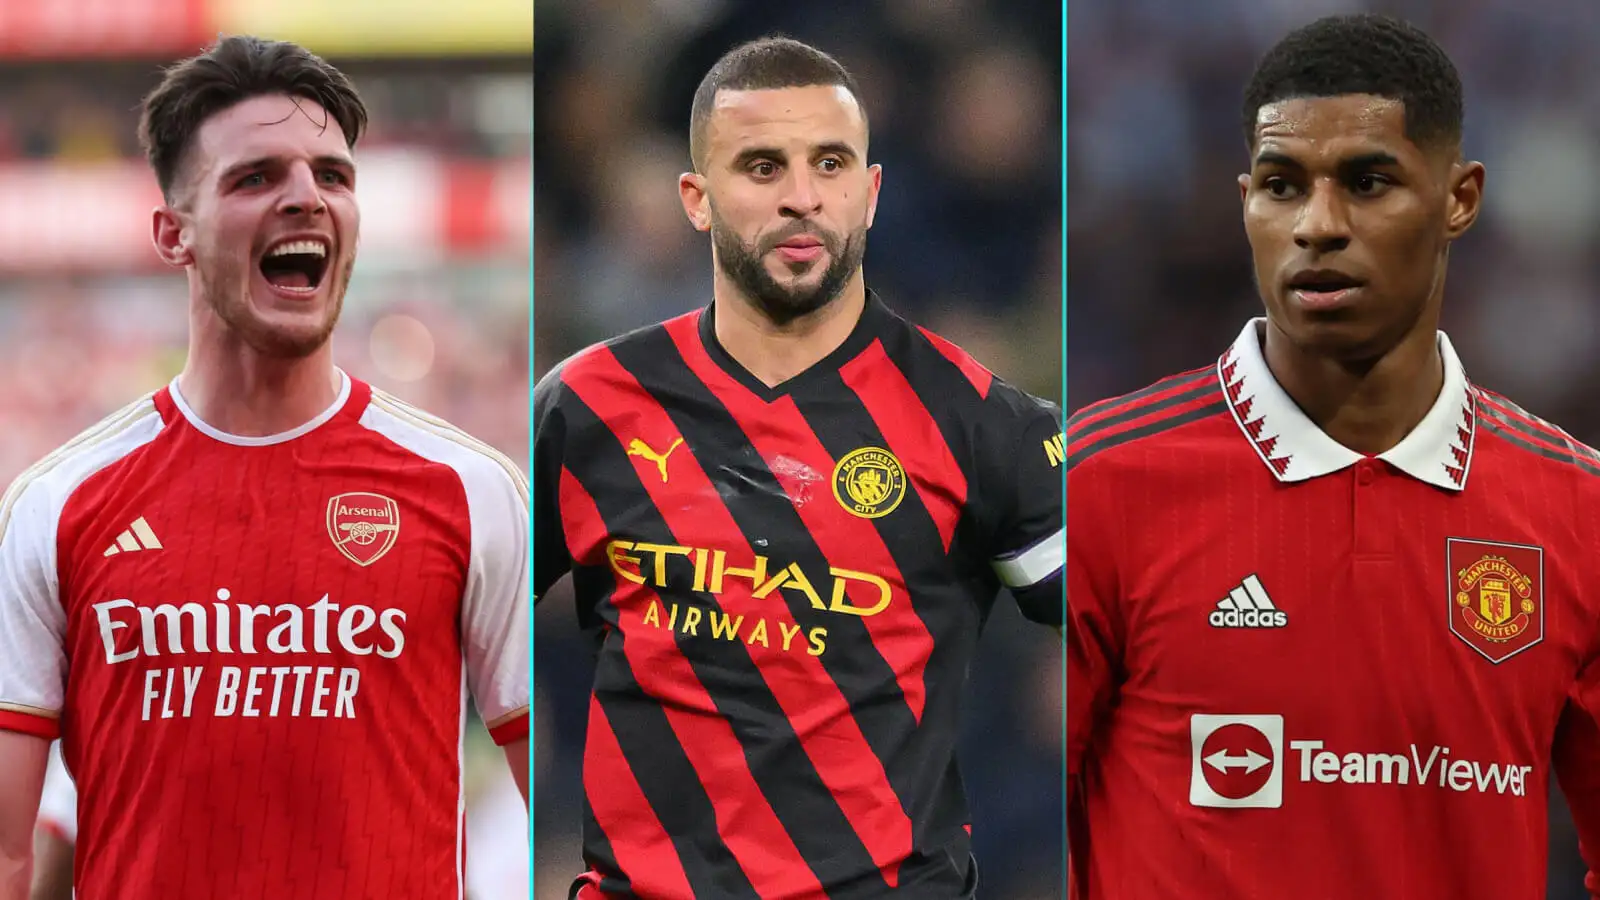 Declan Rice, Kyle Walker and Marcus Rashford have played a lot of football.